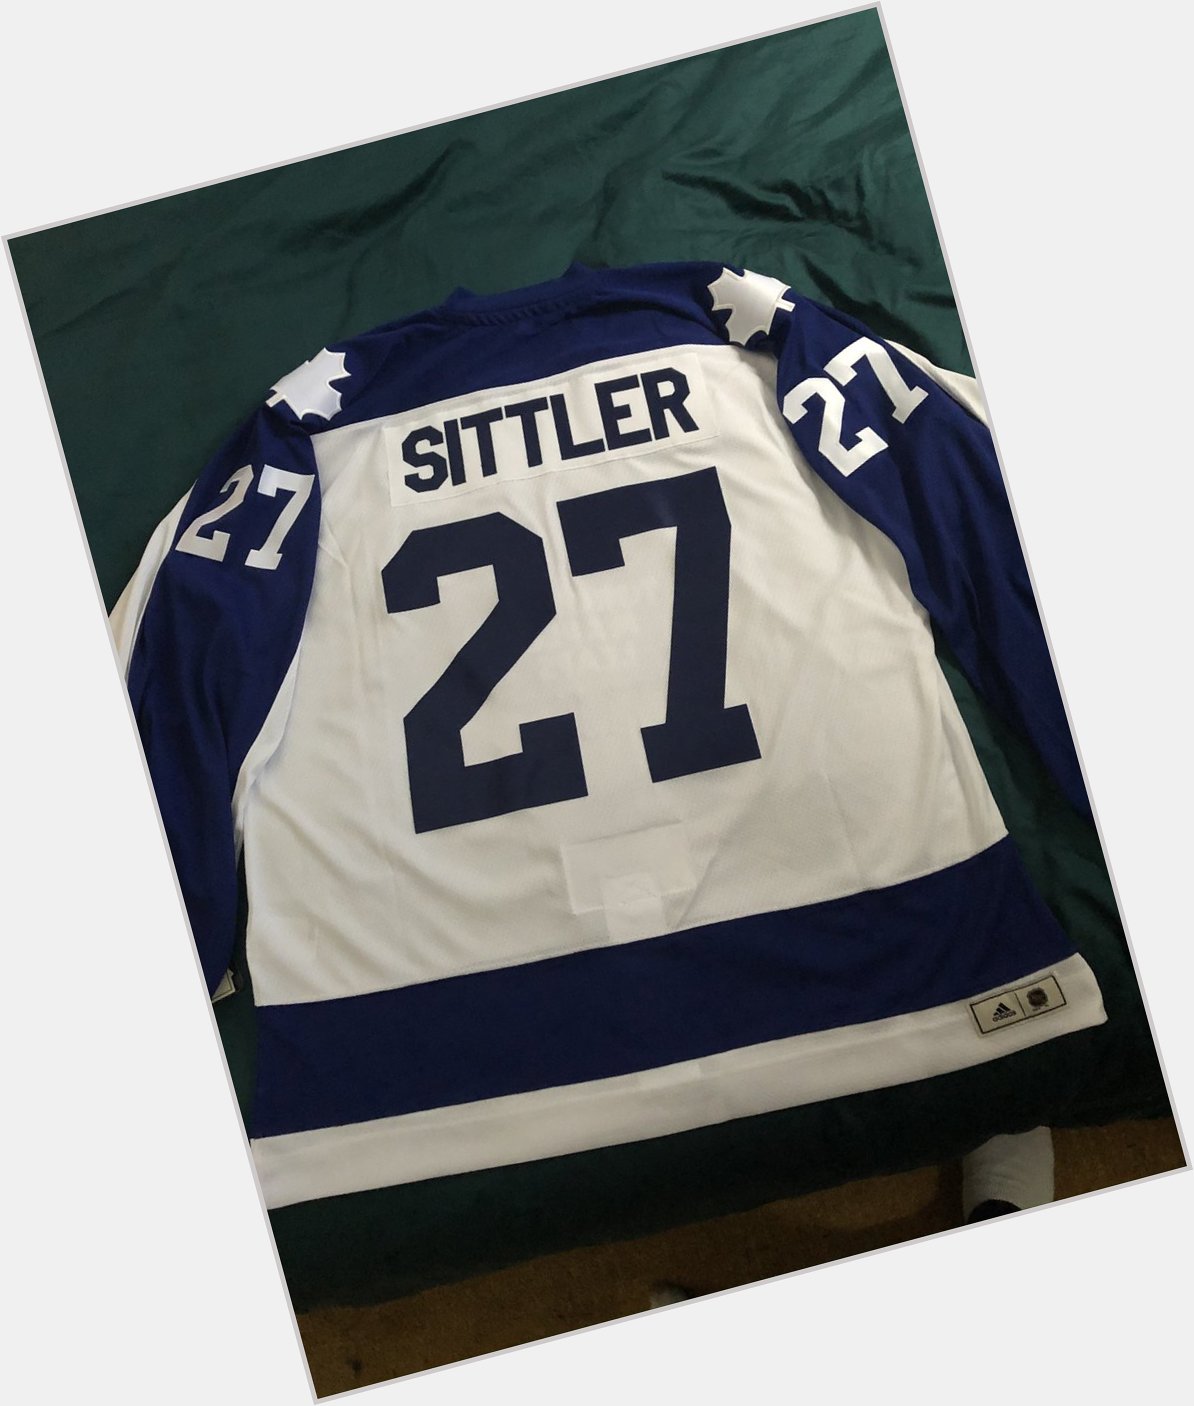 Happy birthday to one of the greats Darryl Sittler 